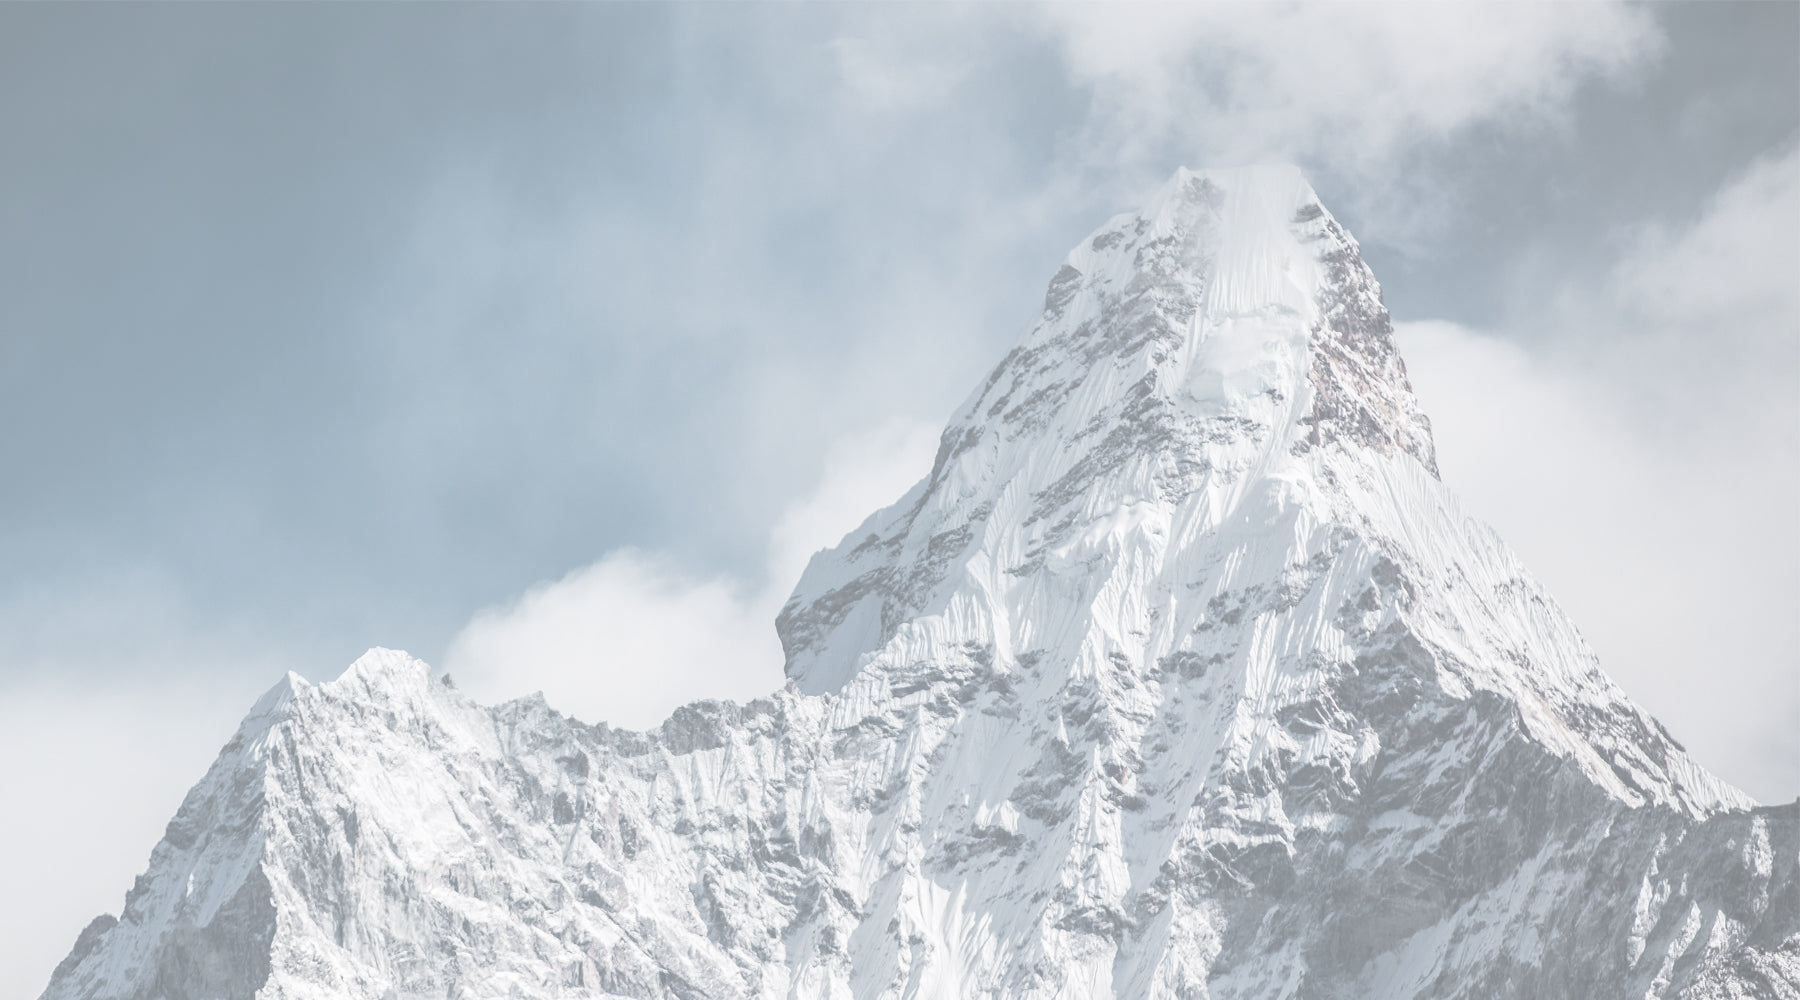 Reach New Heights in Fitness: Join the Mt. Everest 30-Day Climbing Challenge